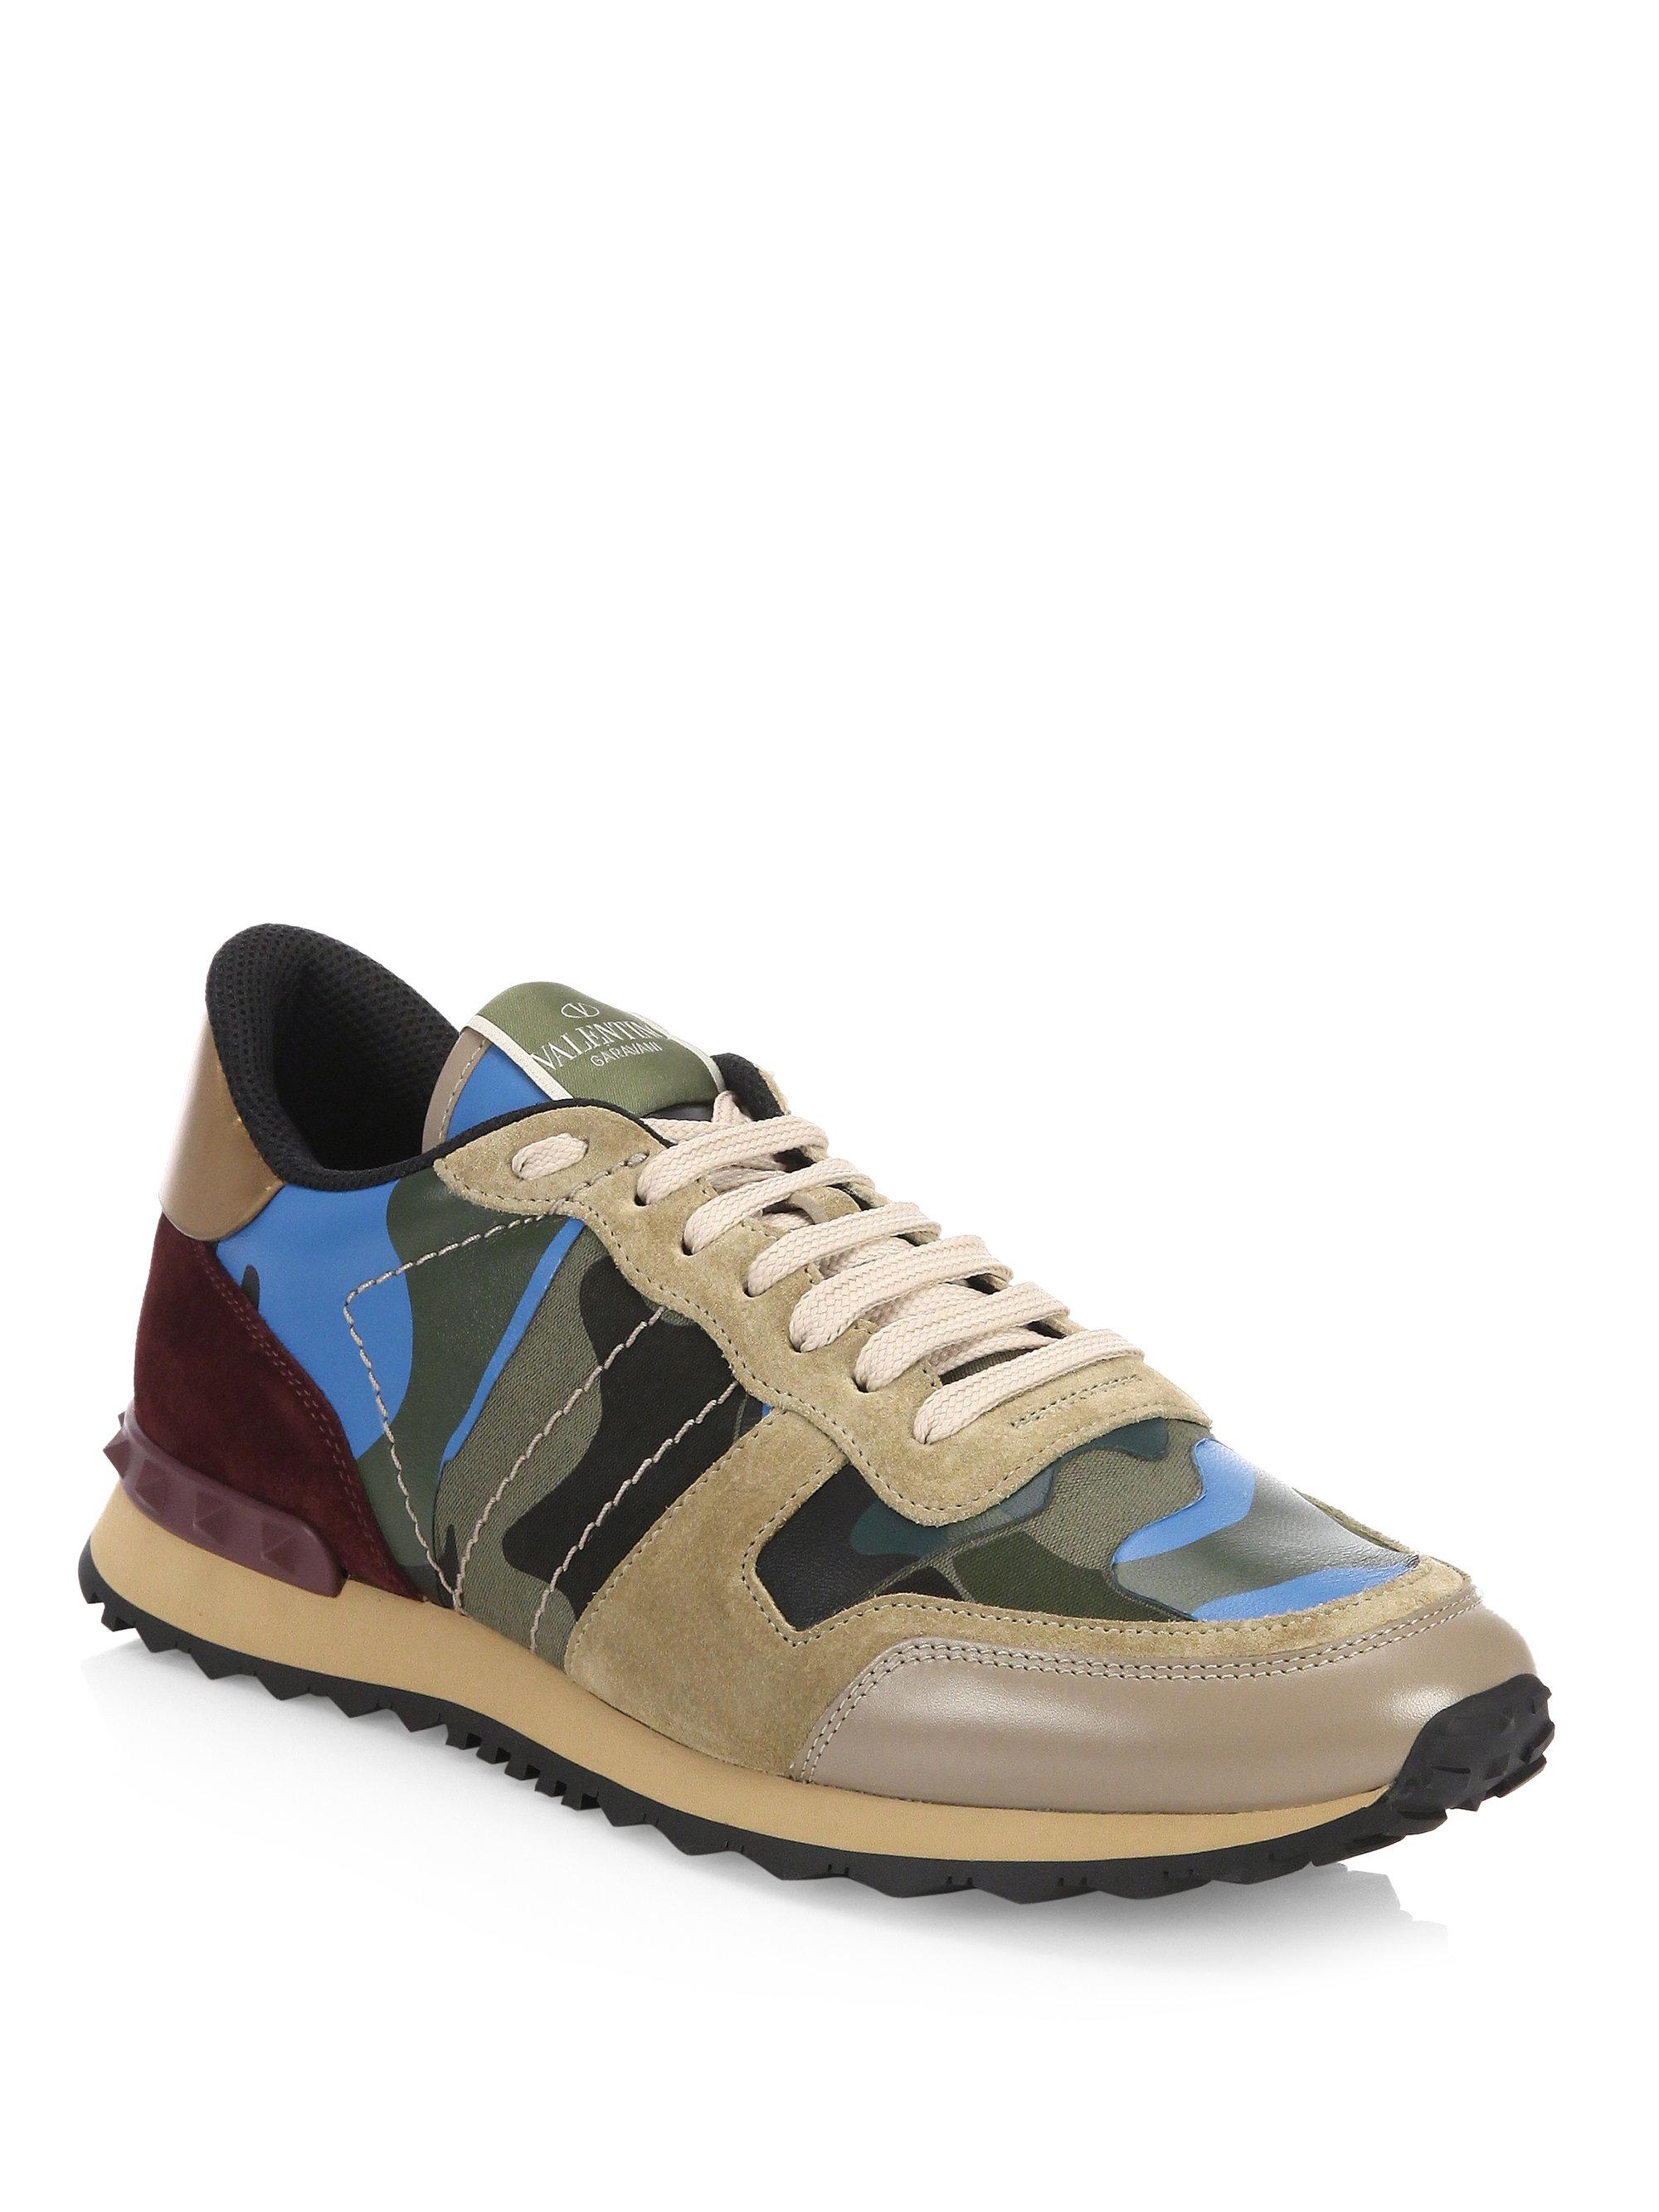 Lyst - Valentino Camo Rock Runner Sneakers in Blue for Men